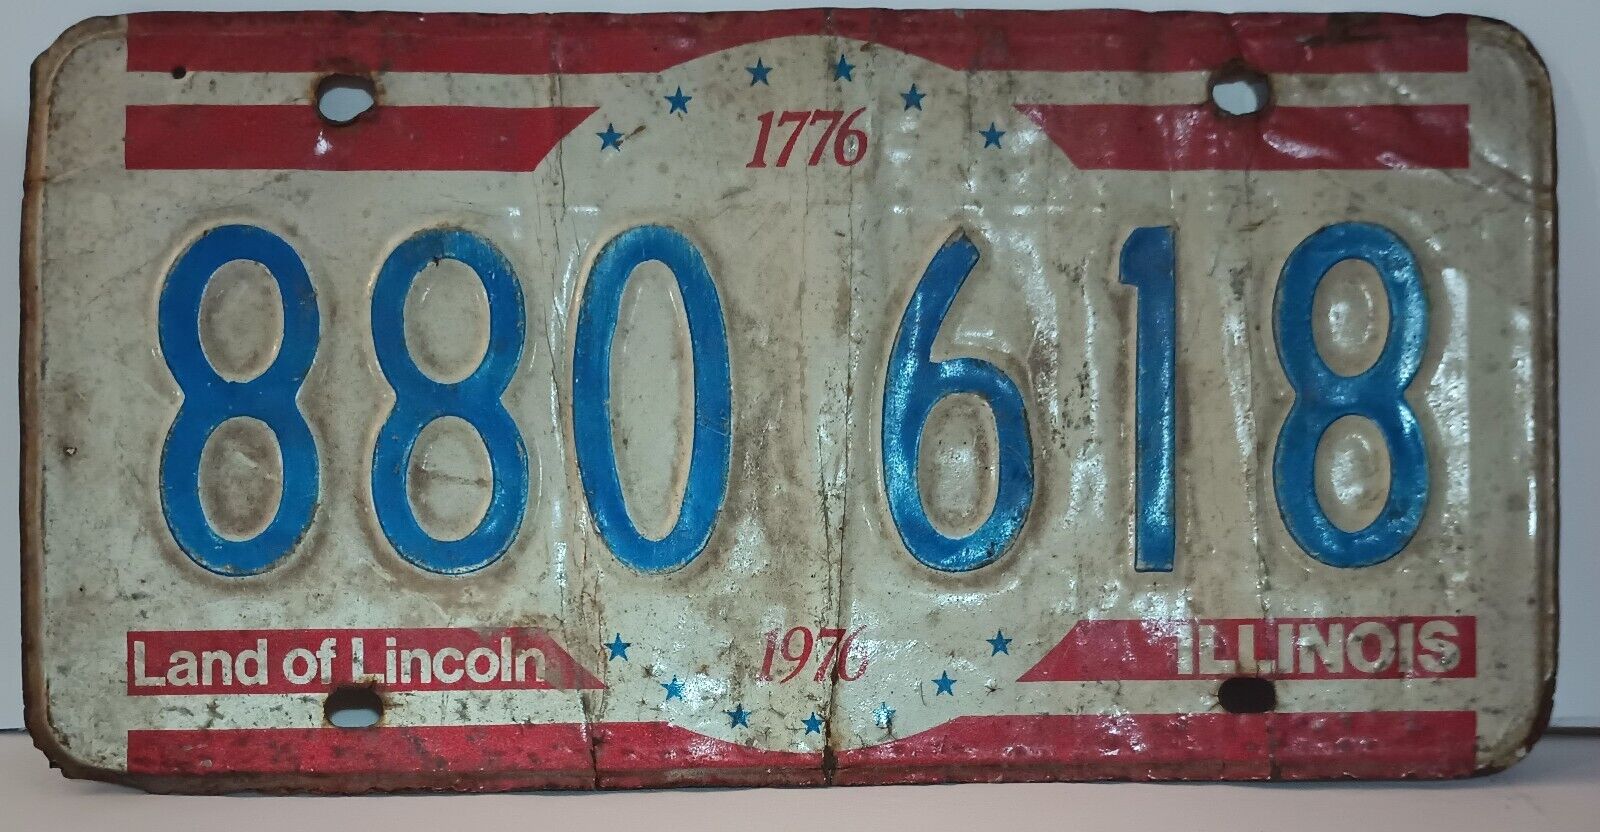 Vintage Wisconsin Bicentennial 1976 license plate, land of Lincoln collection ed